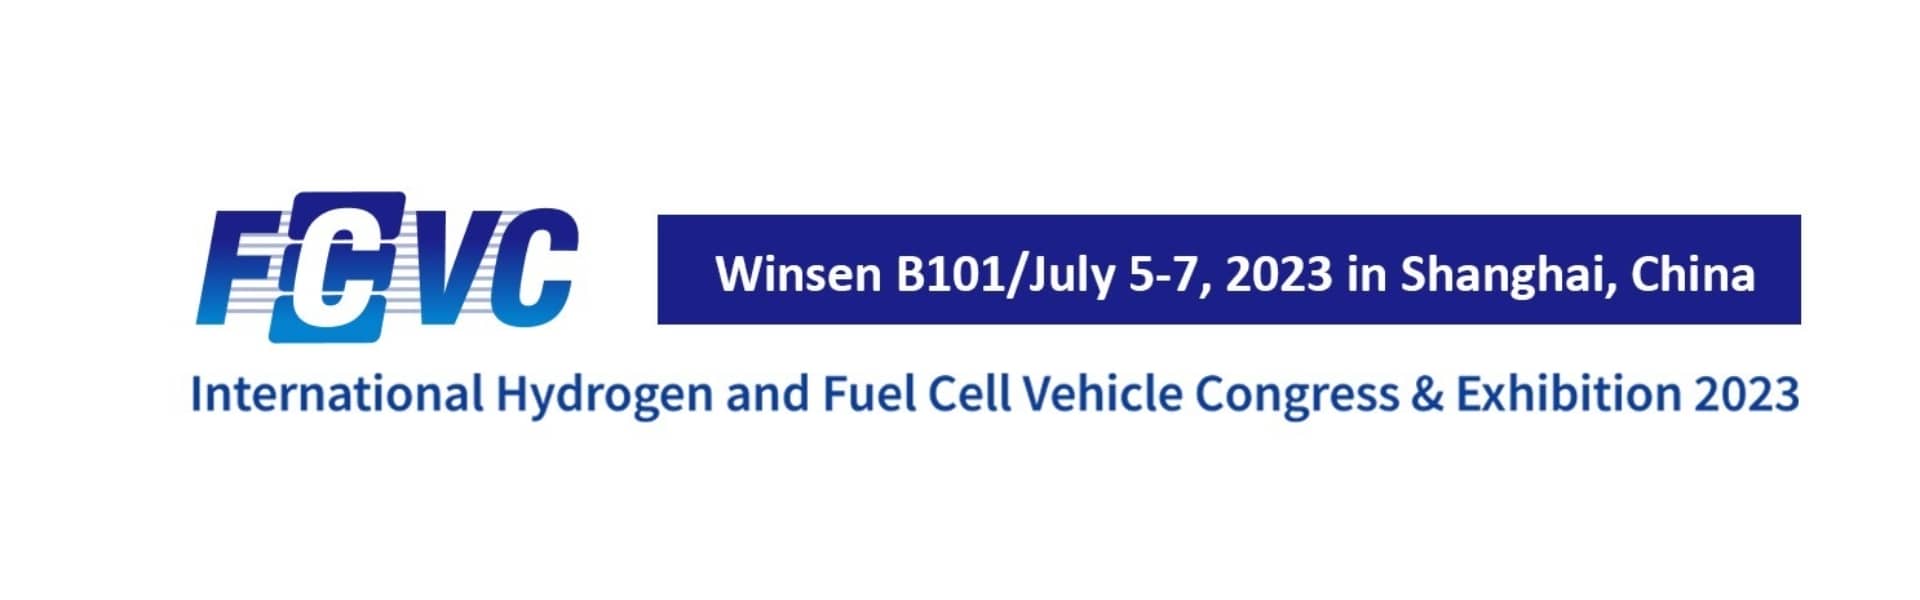 Winsen to attend International Hydrogen and Fuel Cell Vehicle Congress & Exhibition 2023